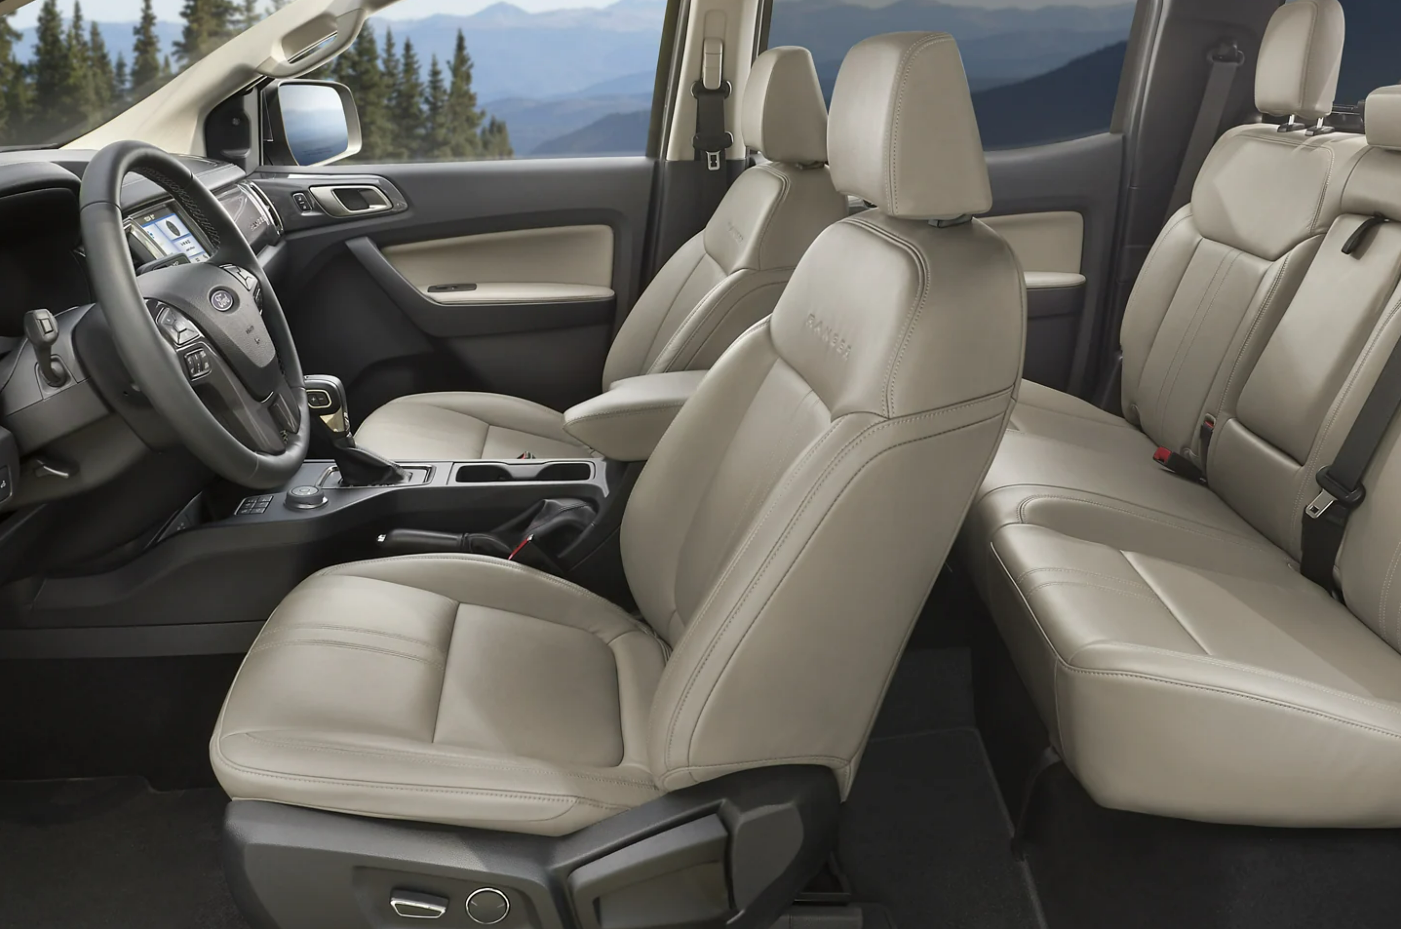 A view of the seating of a 2023 Ford Ranger upholstered in light gray leather